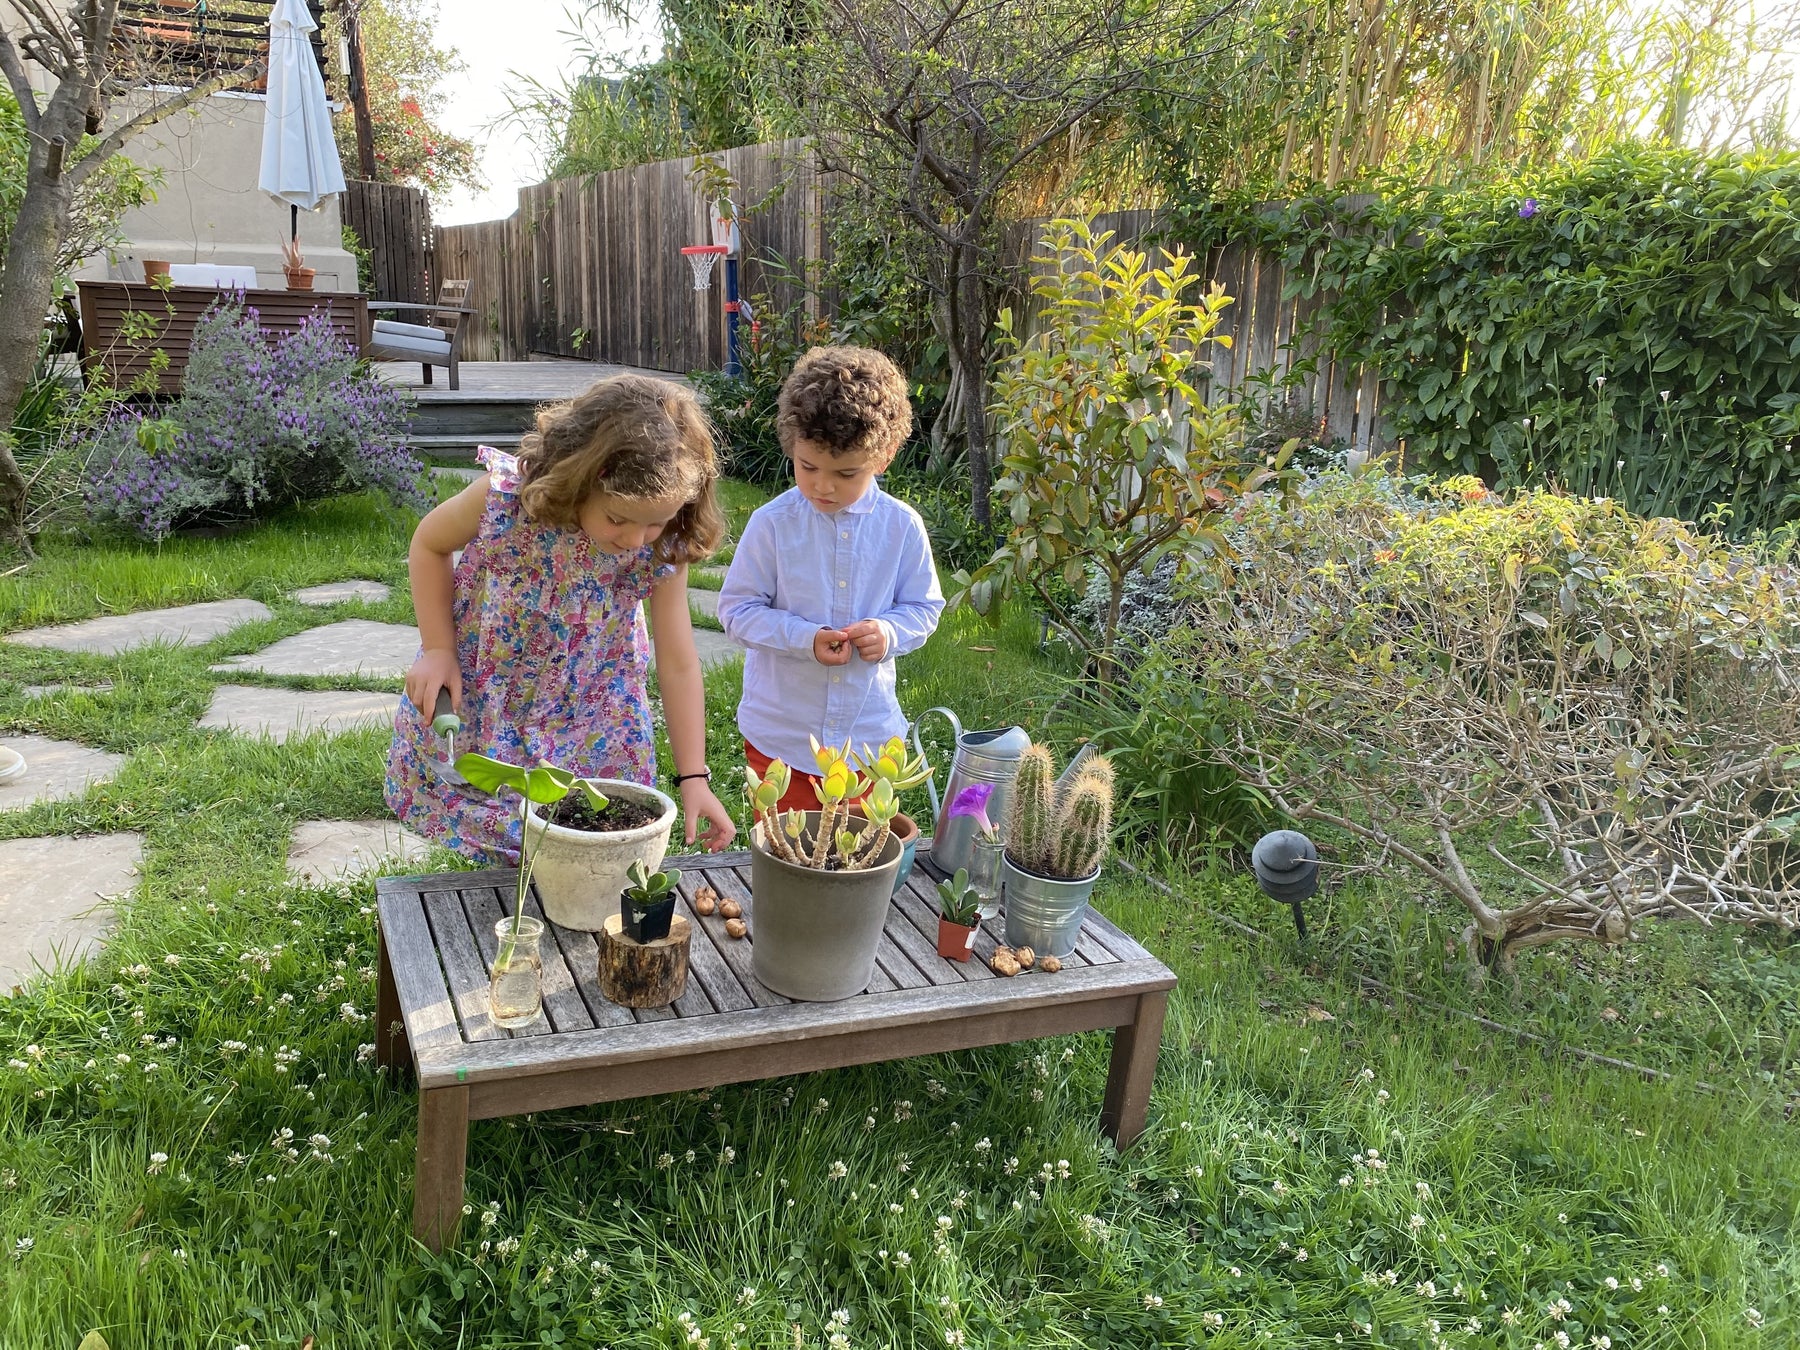 2 children planting flowers in honor of earth day 